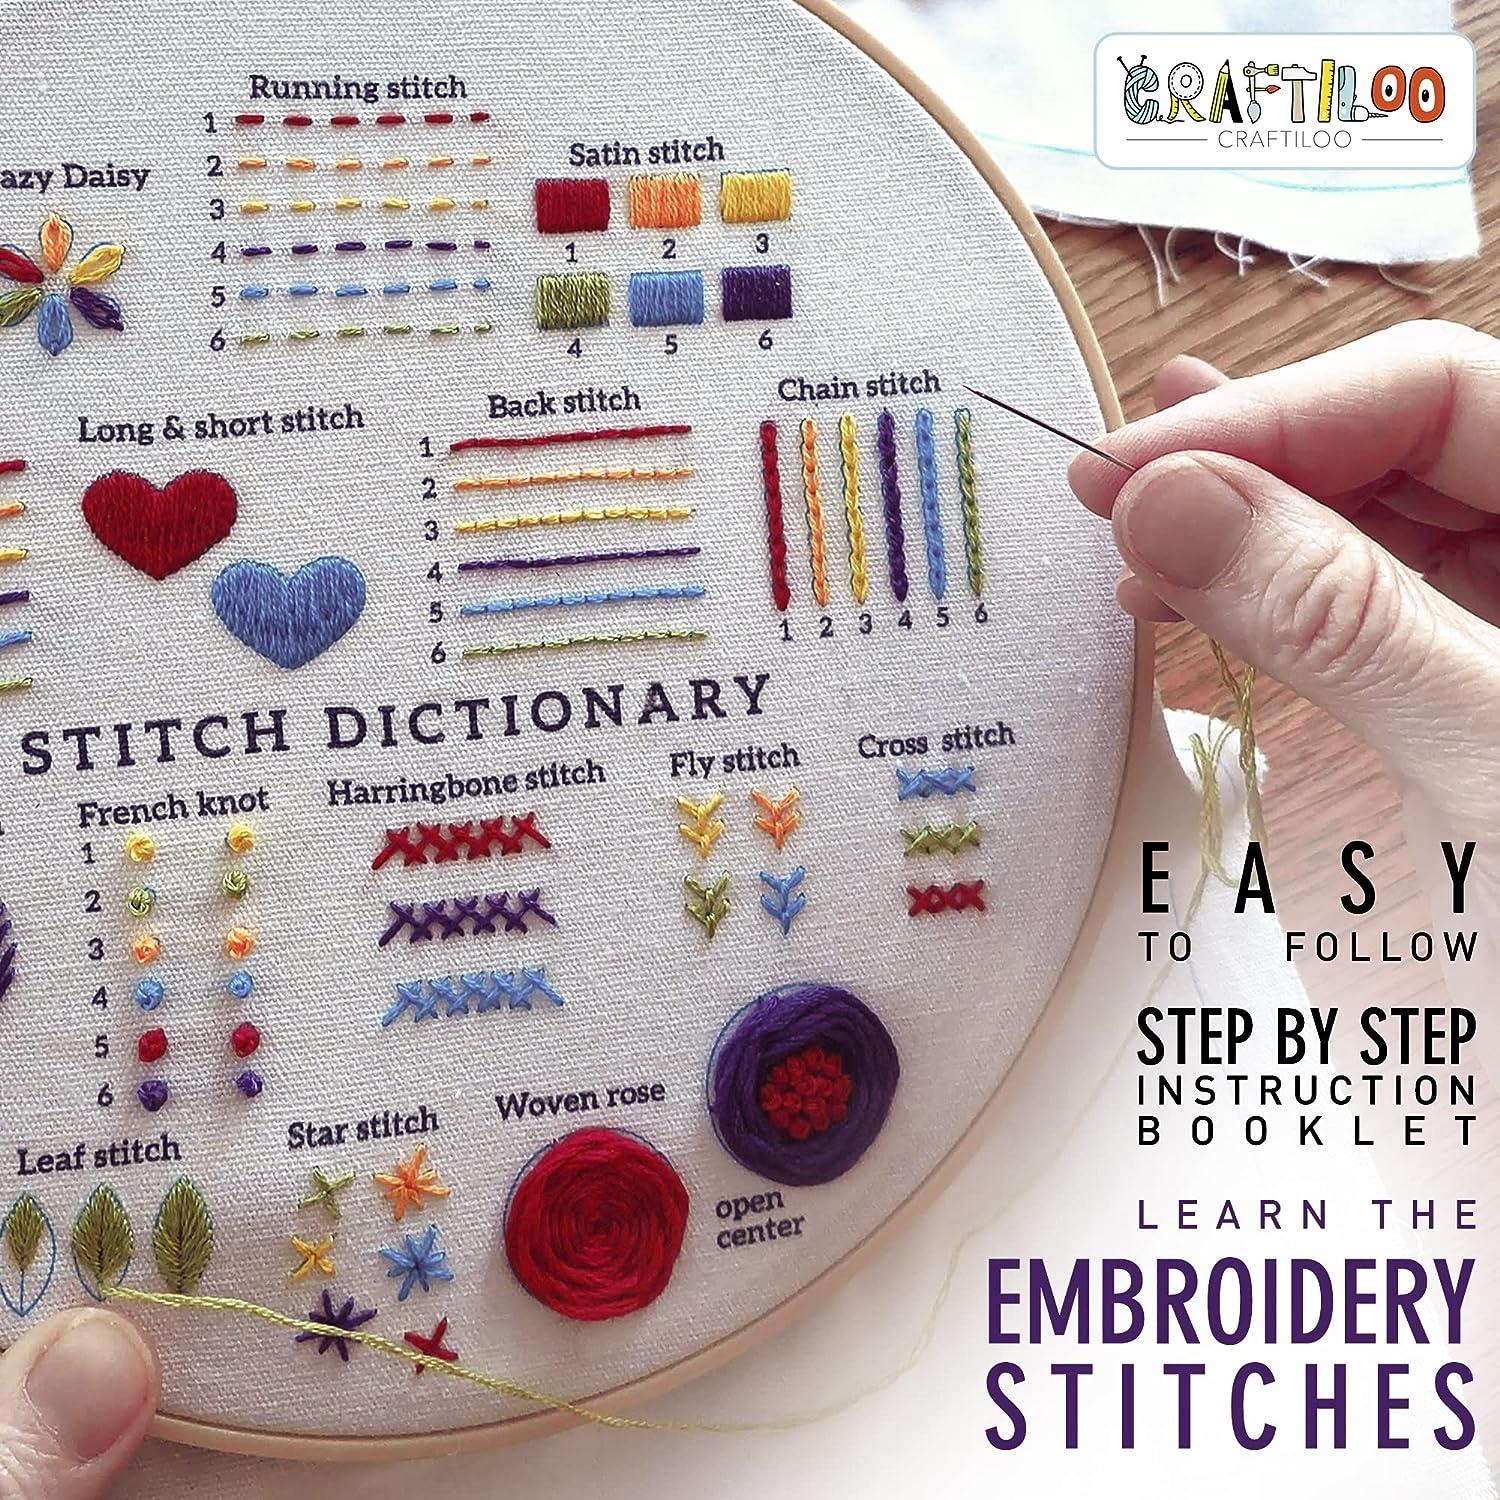 Learn 30 Stitches Elephant Embroidery kit for Beginners embroidery kit with  Stamped Embroidery Patterns. Embroidery Kits. Embroidery Starter Kit.  Needlepoint Cross Stitch Kit for Kids & Adults Stitch Dictionary